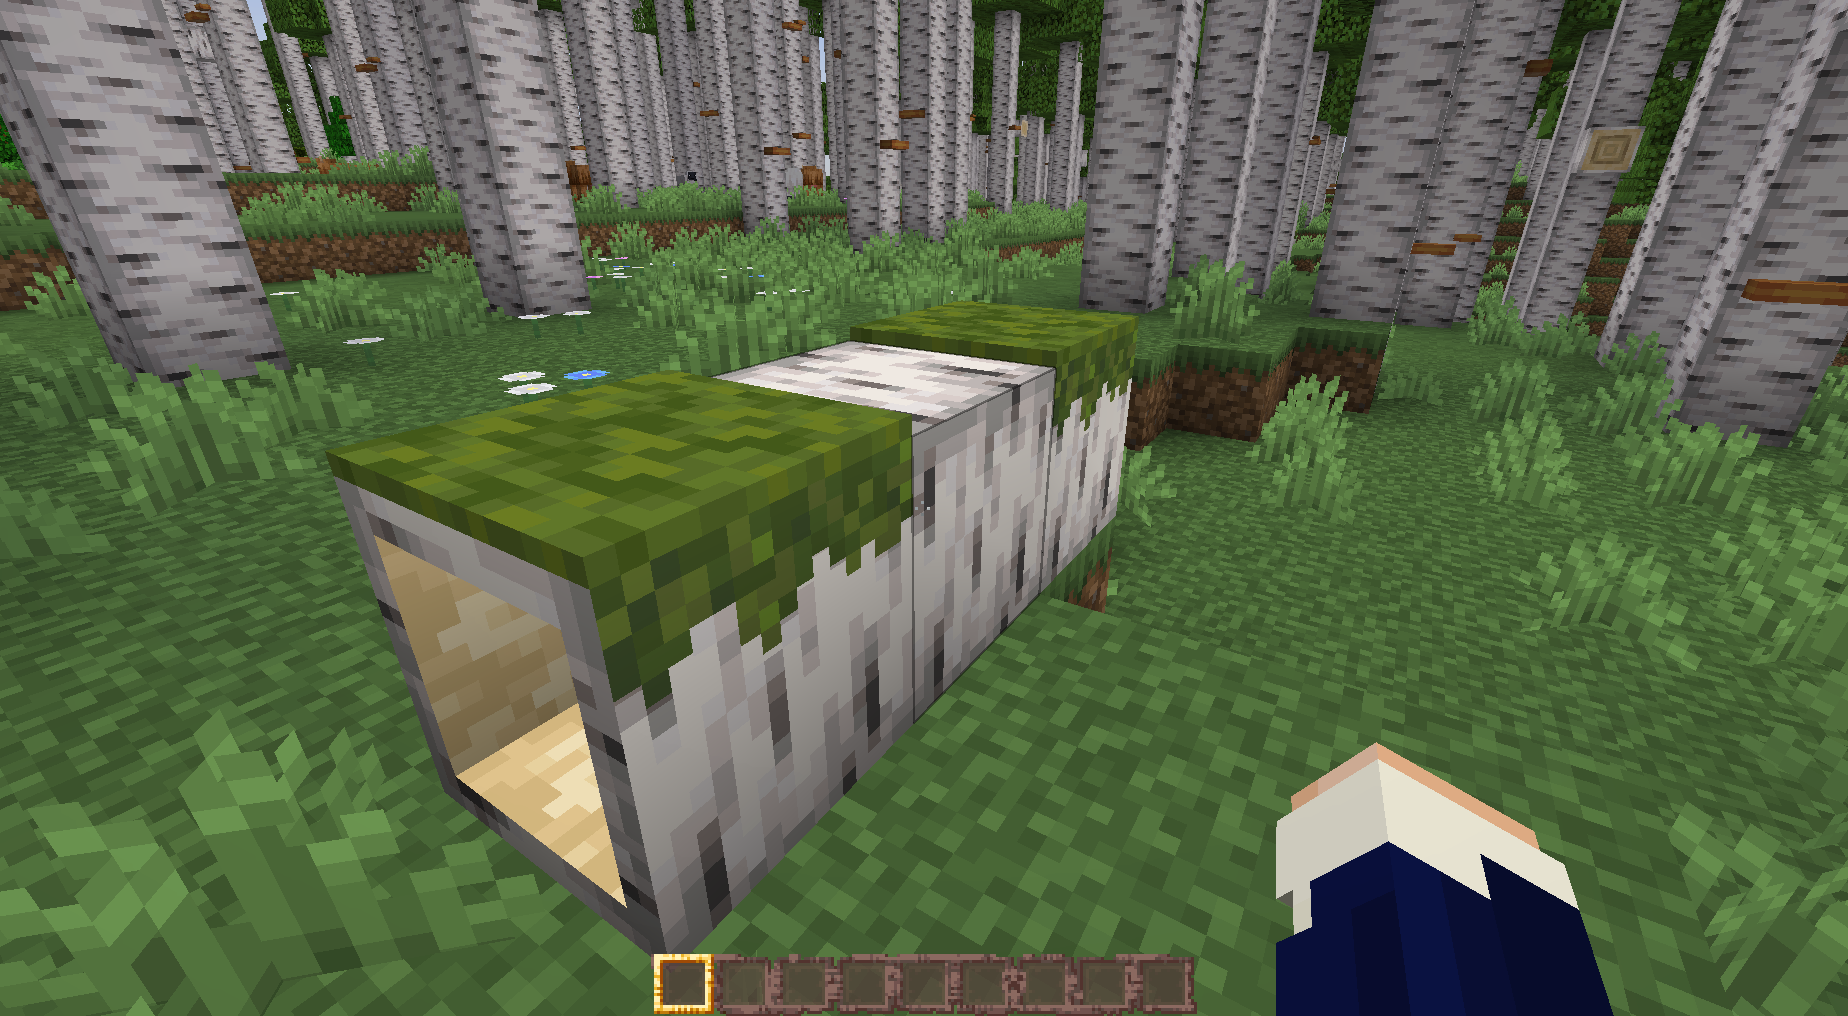 This shows a fallen birch log, with the textures being changed by a resource pack, Jicklus. This should work with most resource packs.